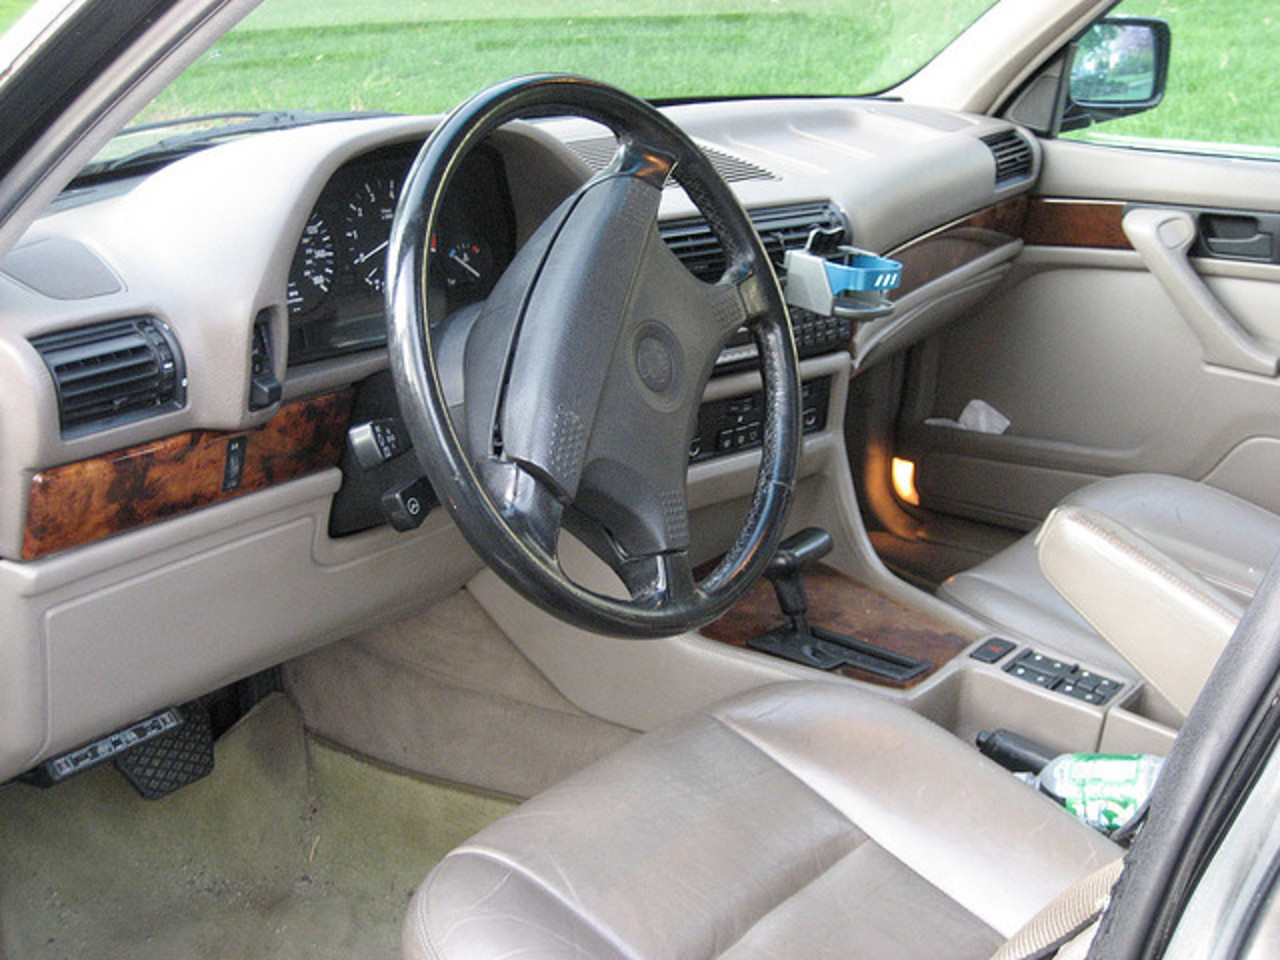 1992 BMW 735iL (Inside Driver) | Flickr - Photo Sharing!